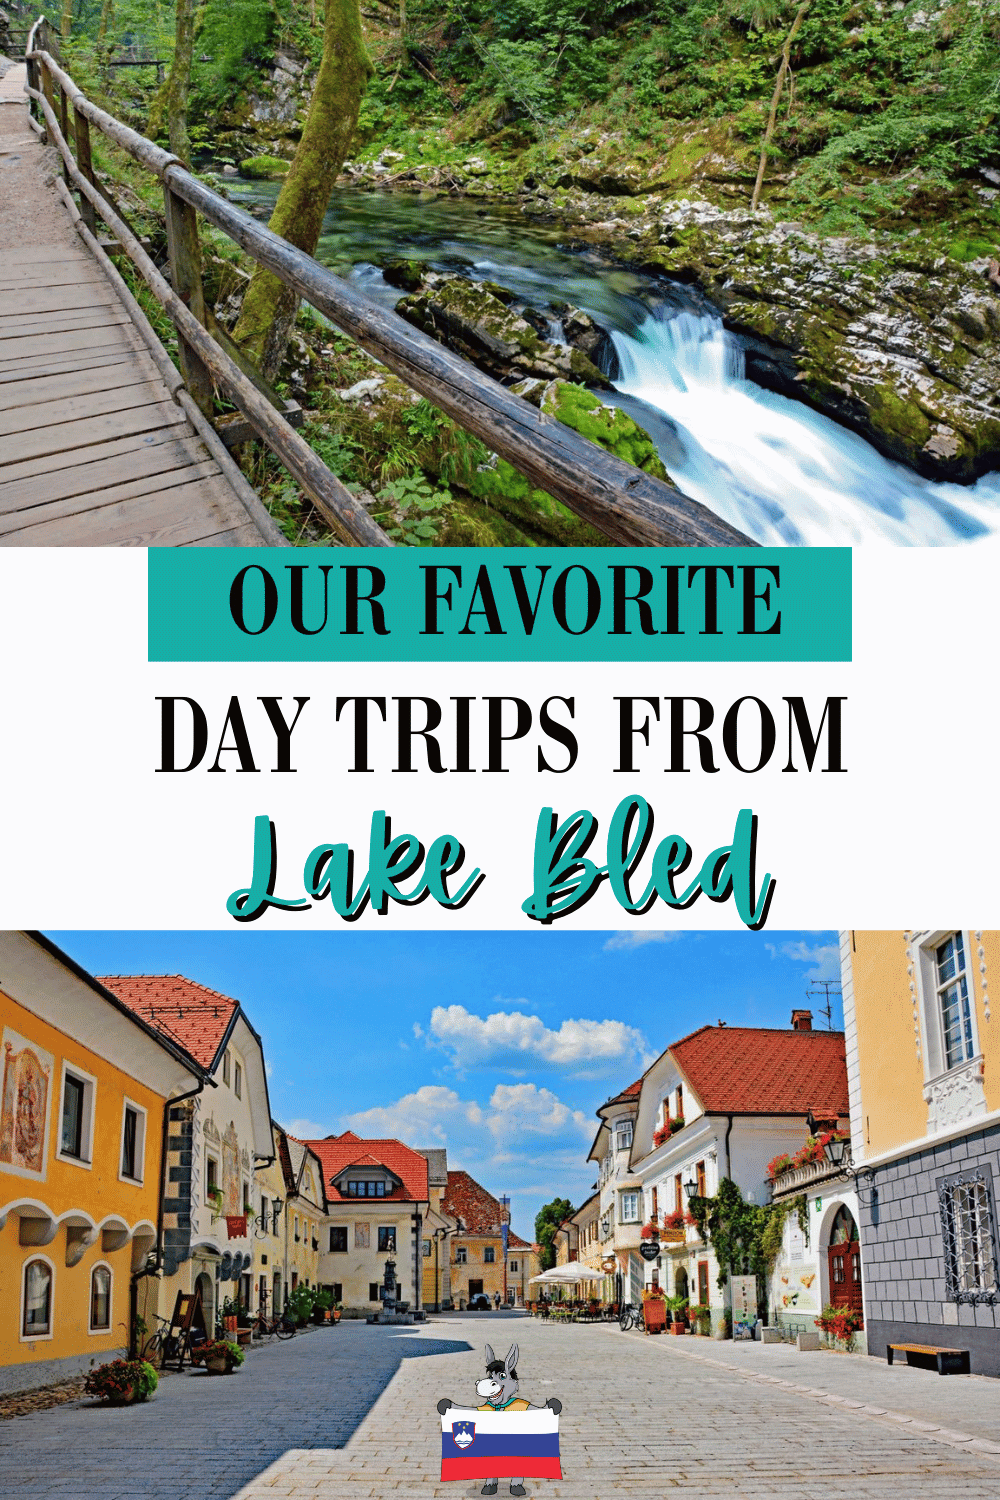 Slovenia Travel Blog_Best Day Trips From Lake Bled